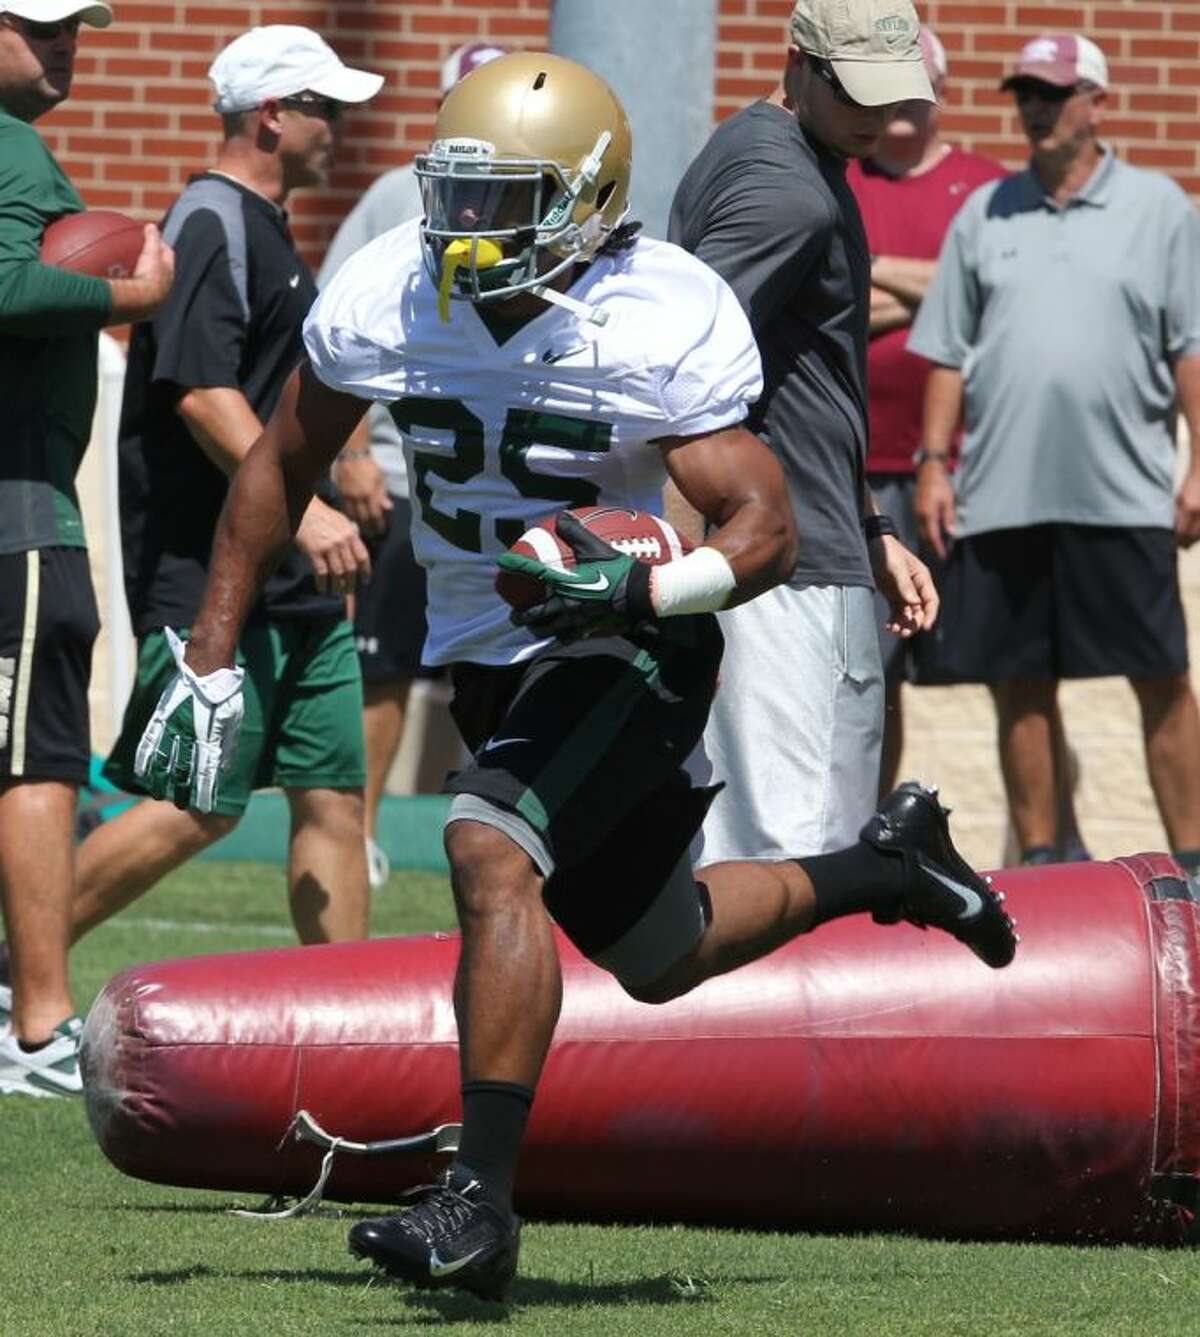 Baylor junior running back Lache Seastrunk takes part in a drill on Aug. 5 in Waco.